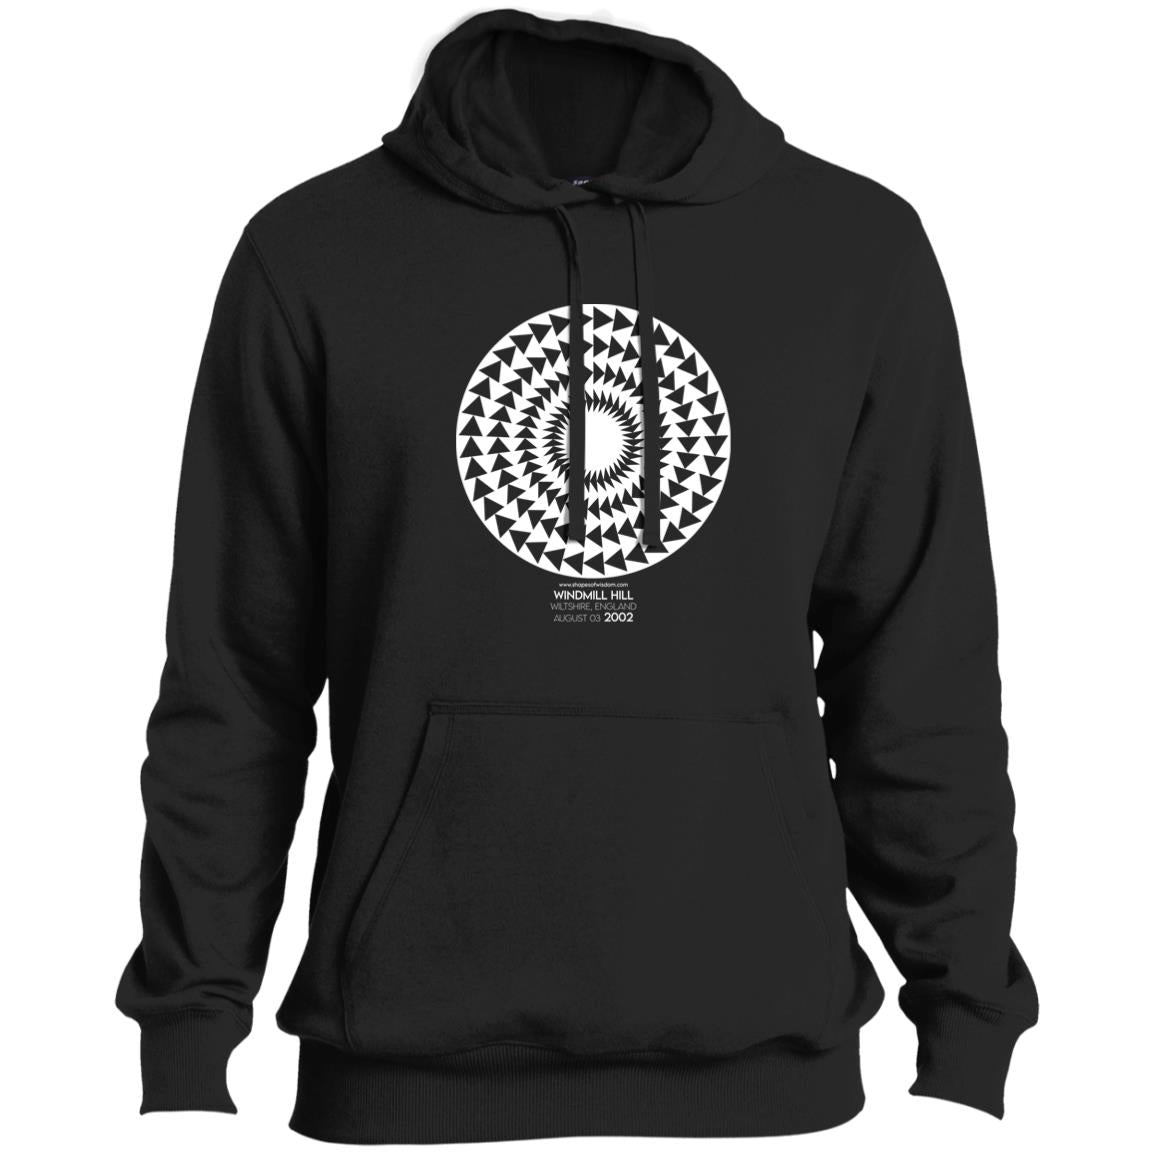 Crop Circle Pullover Hoodie - Windmill Hill 7